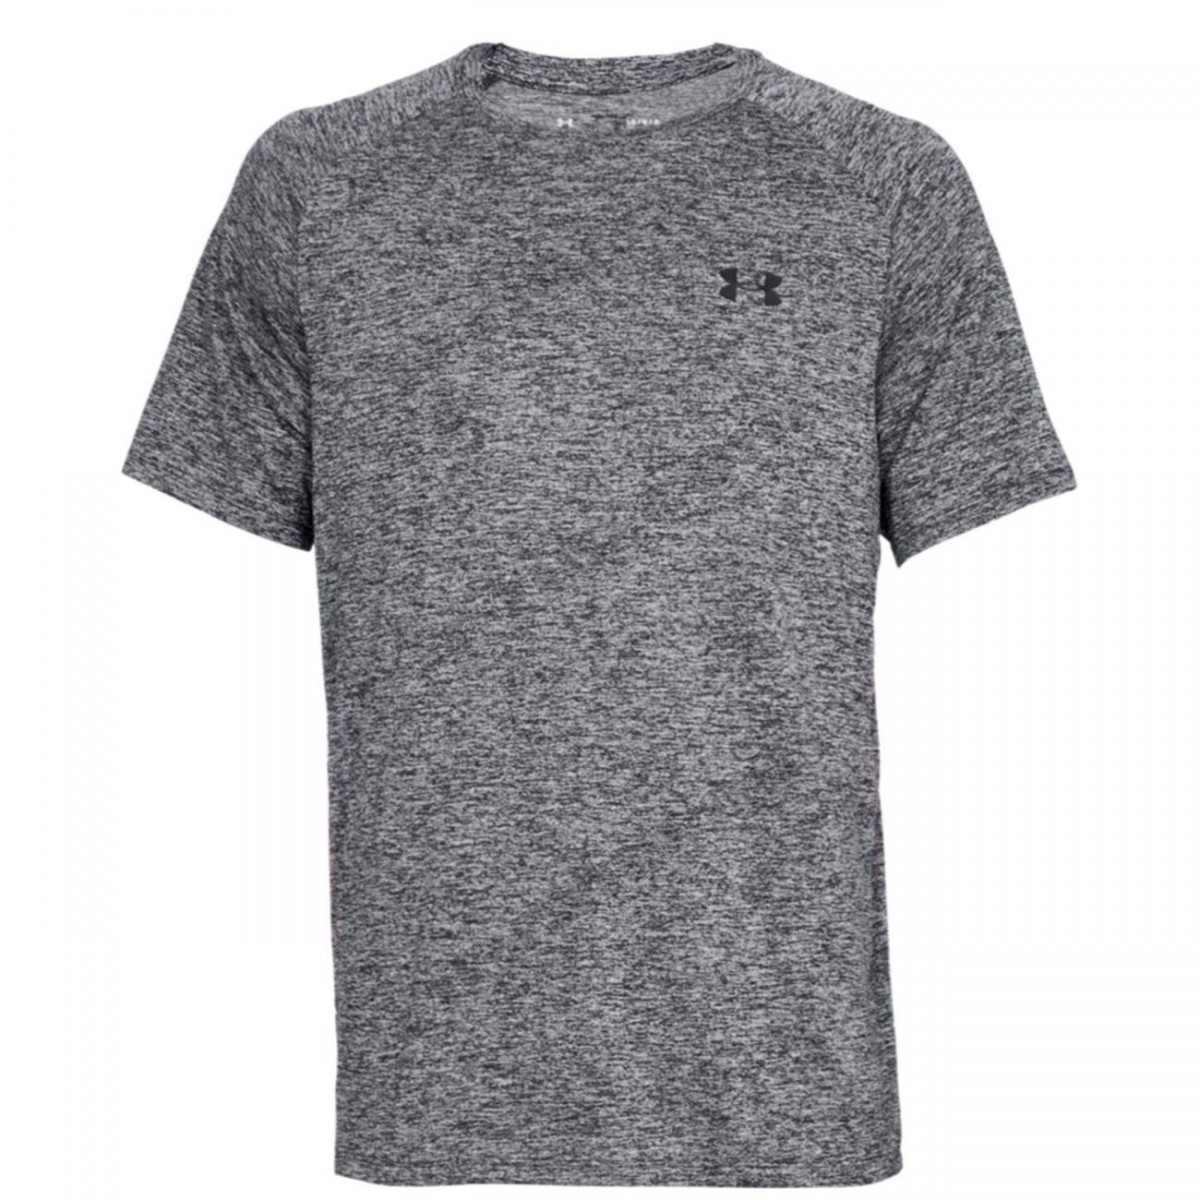 Under Armour/running adulte UNDER ARMOUR Maillot running manches courtes - Homme - UA005 - gris √ Nouveau style √ Soldes - -4